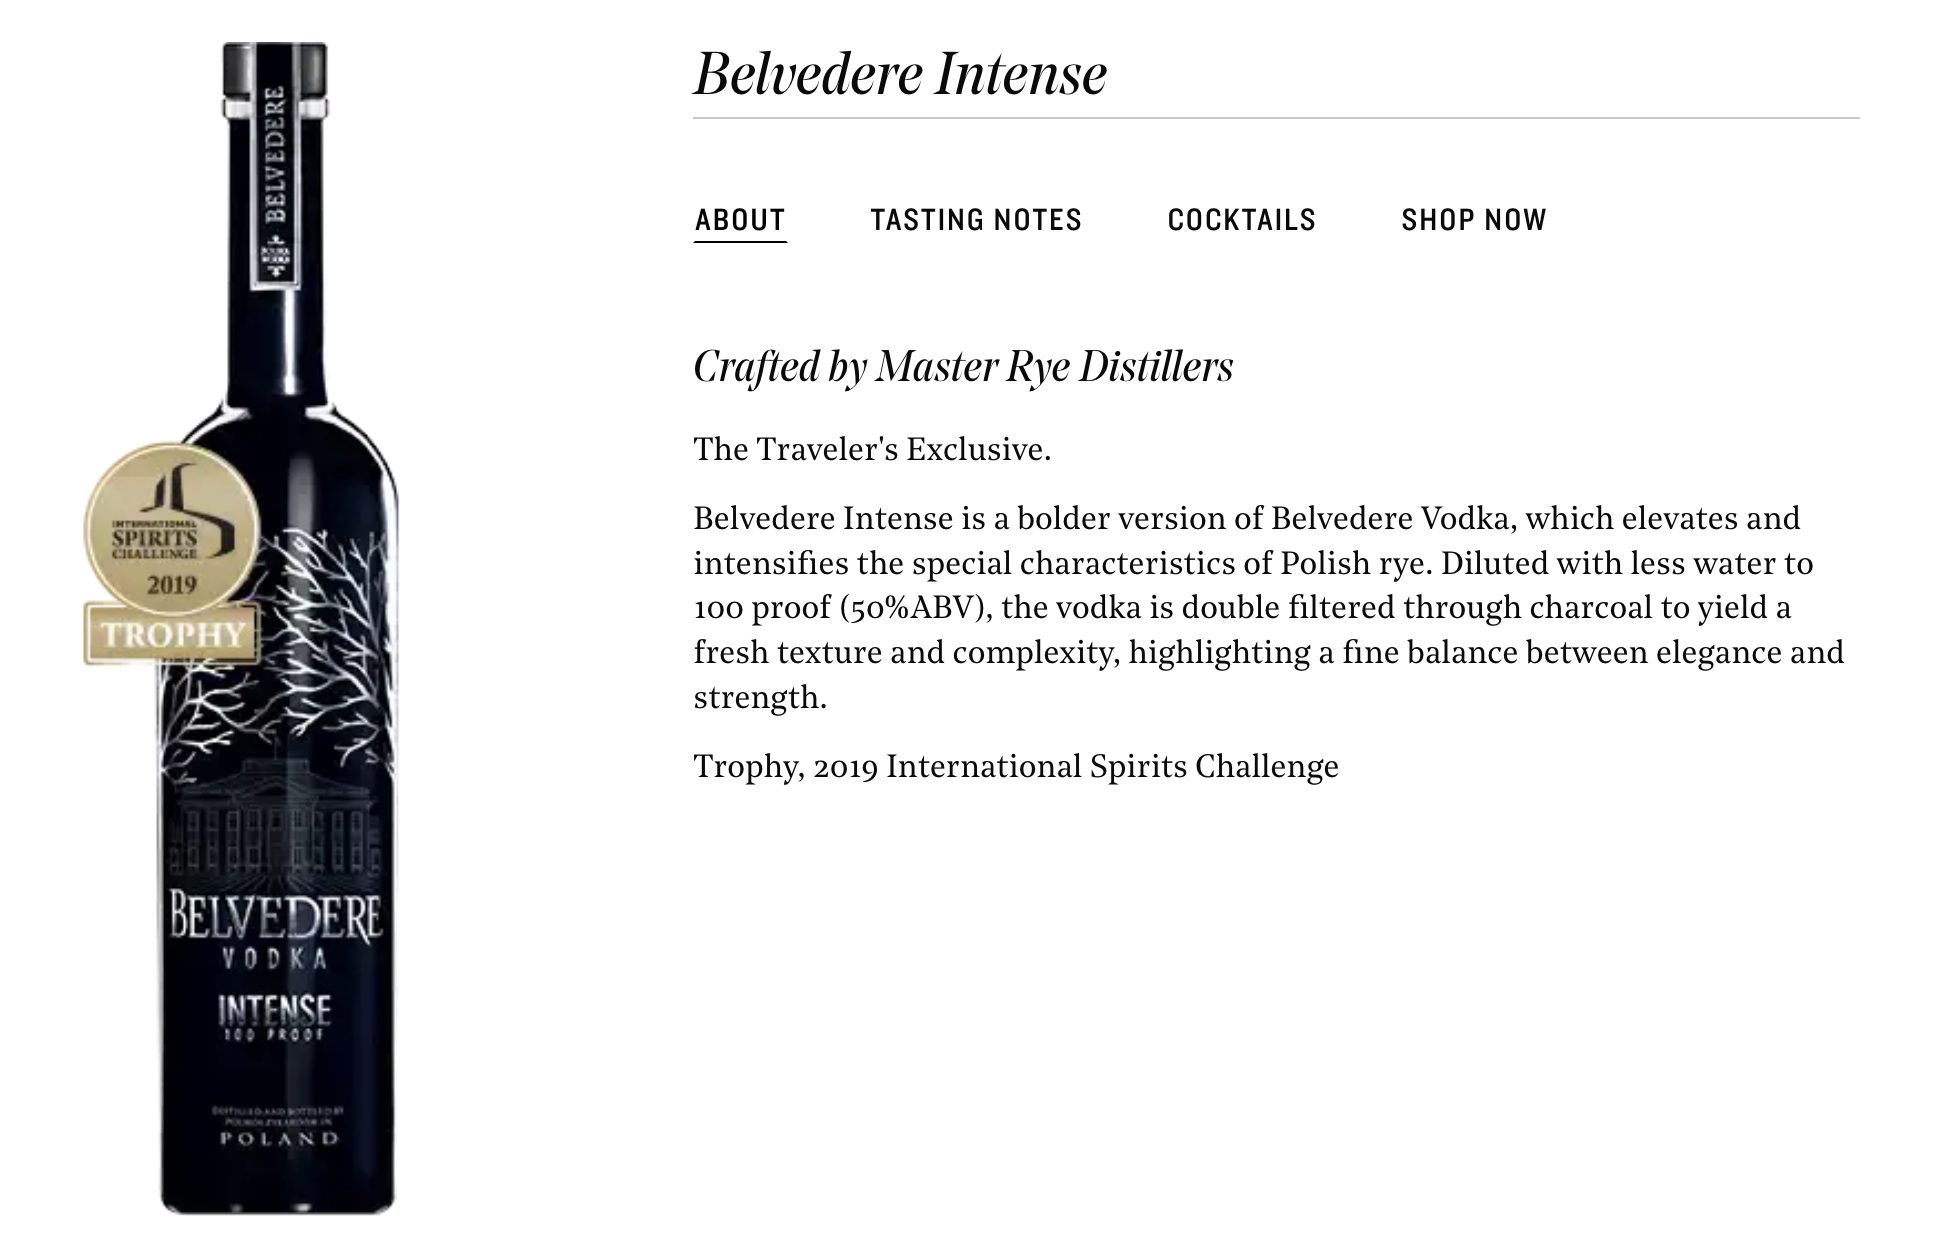 New French vodka brand challenges Belvedere - The Spirits Business